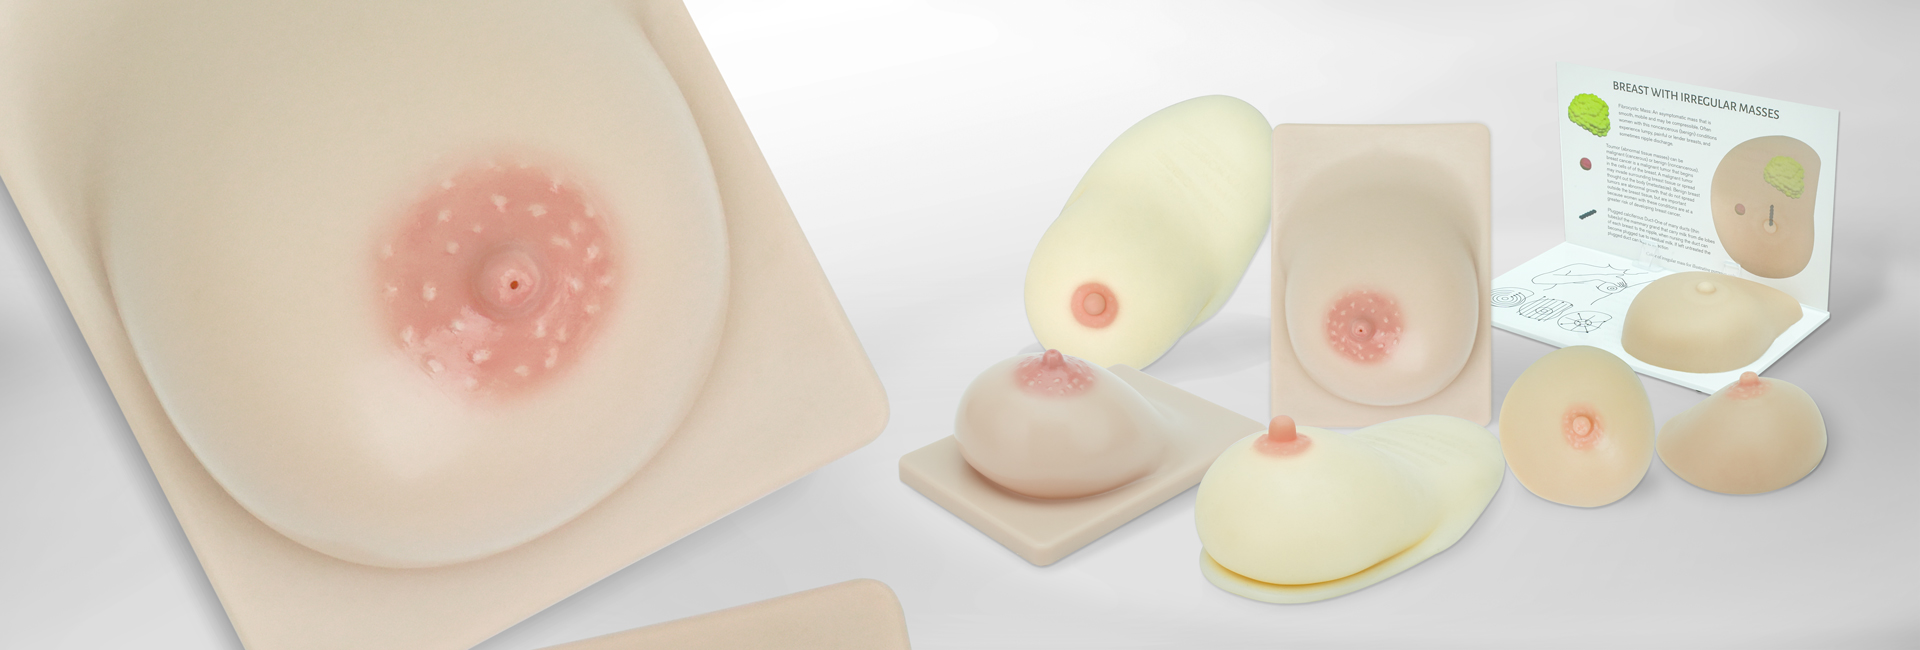 Silicone Breast  Models for Education